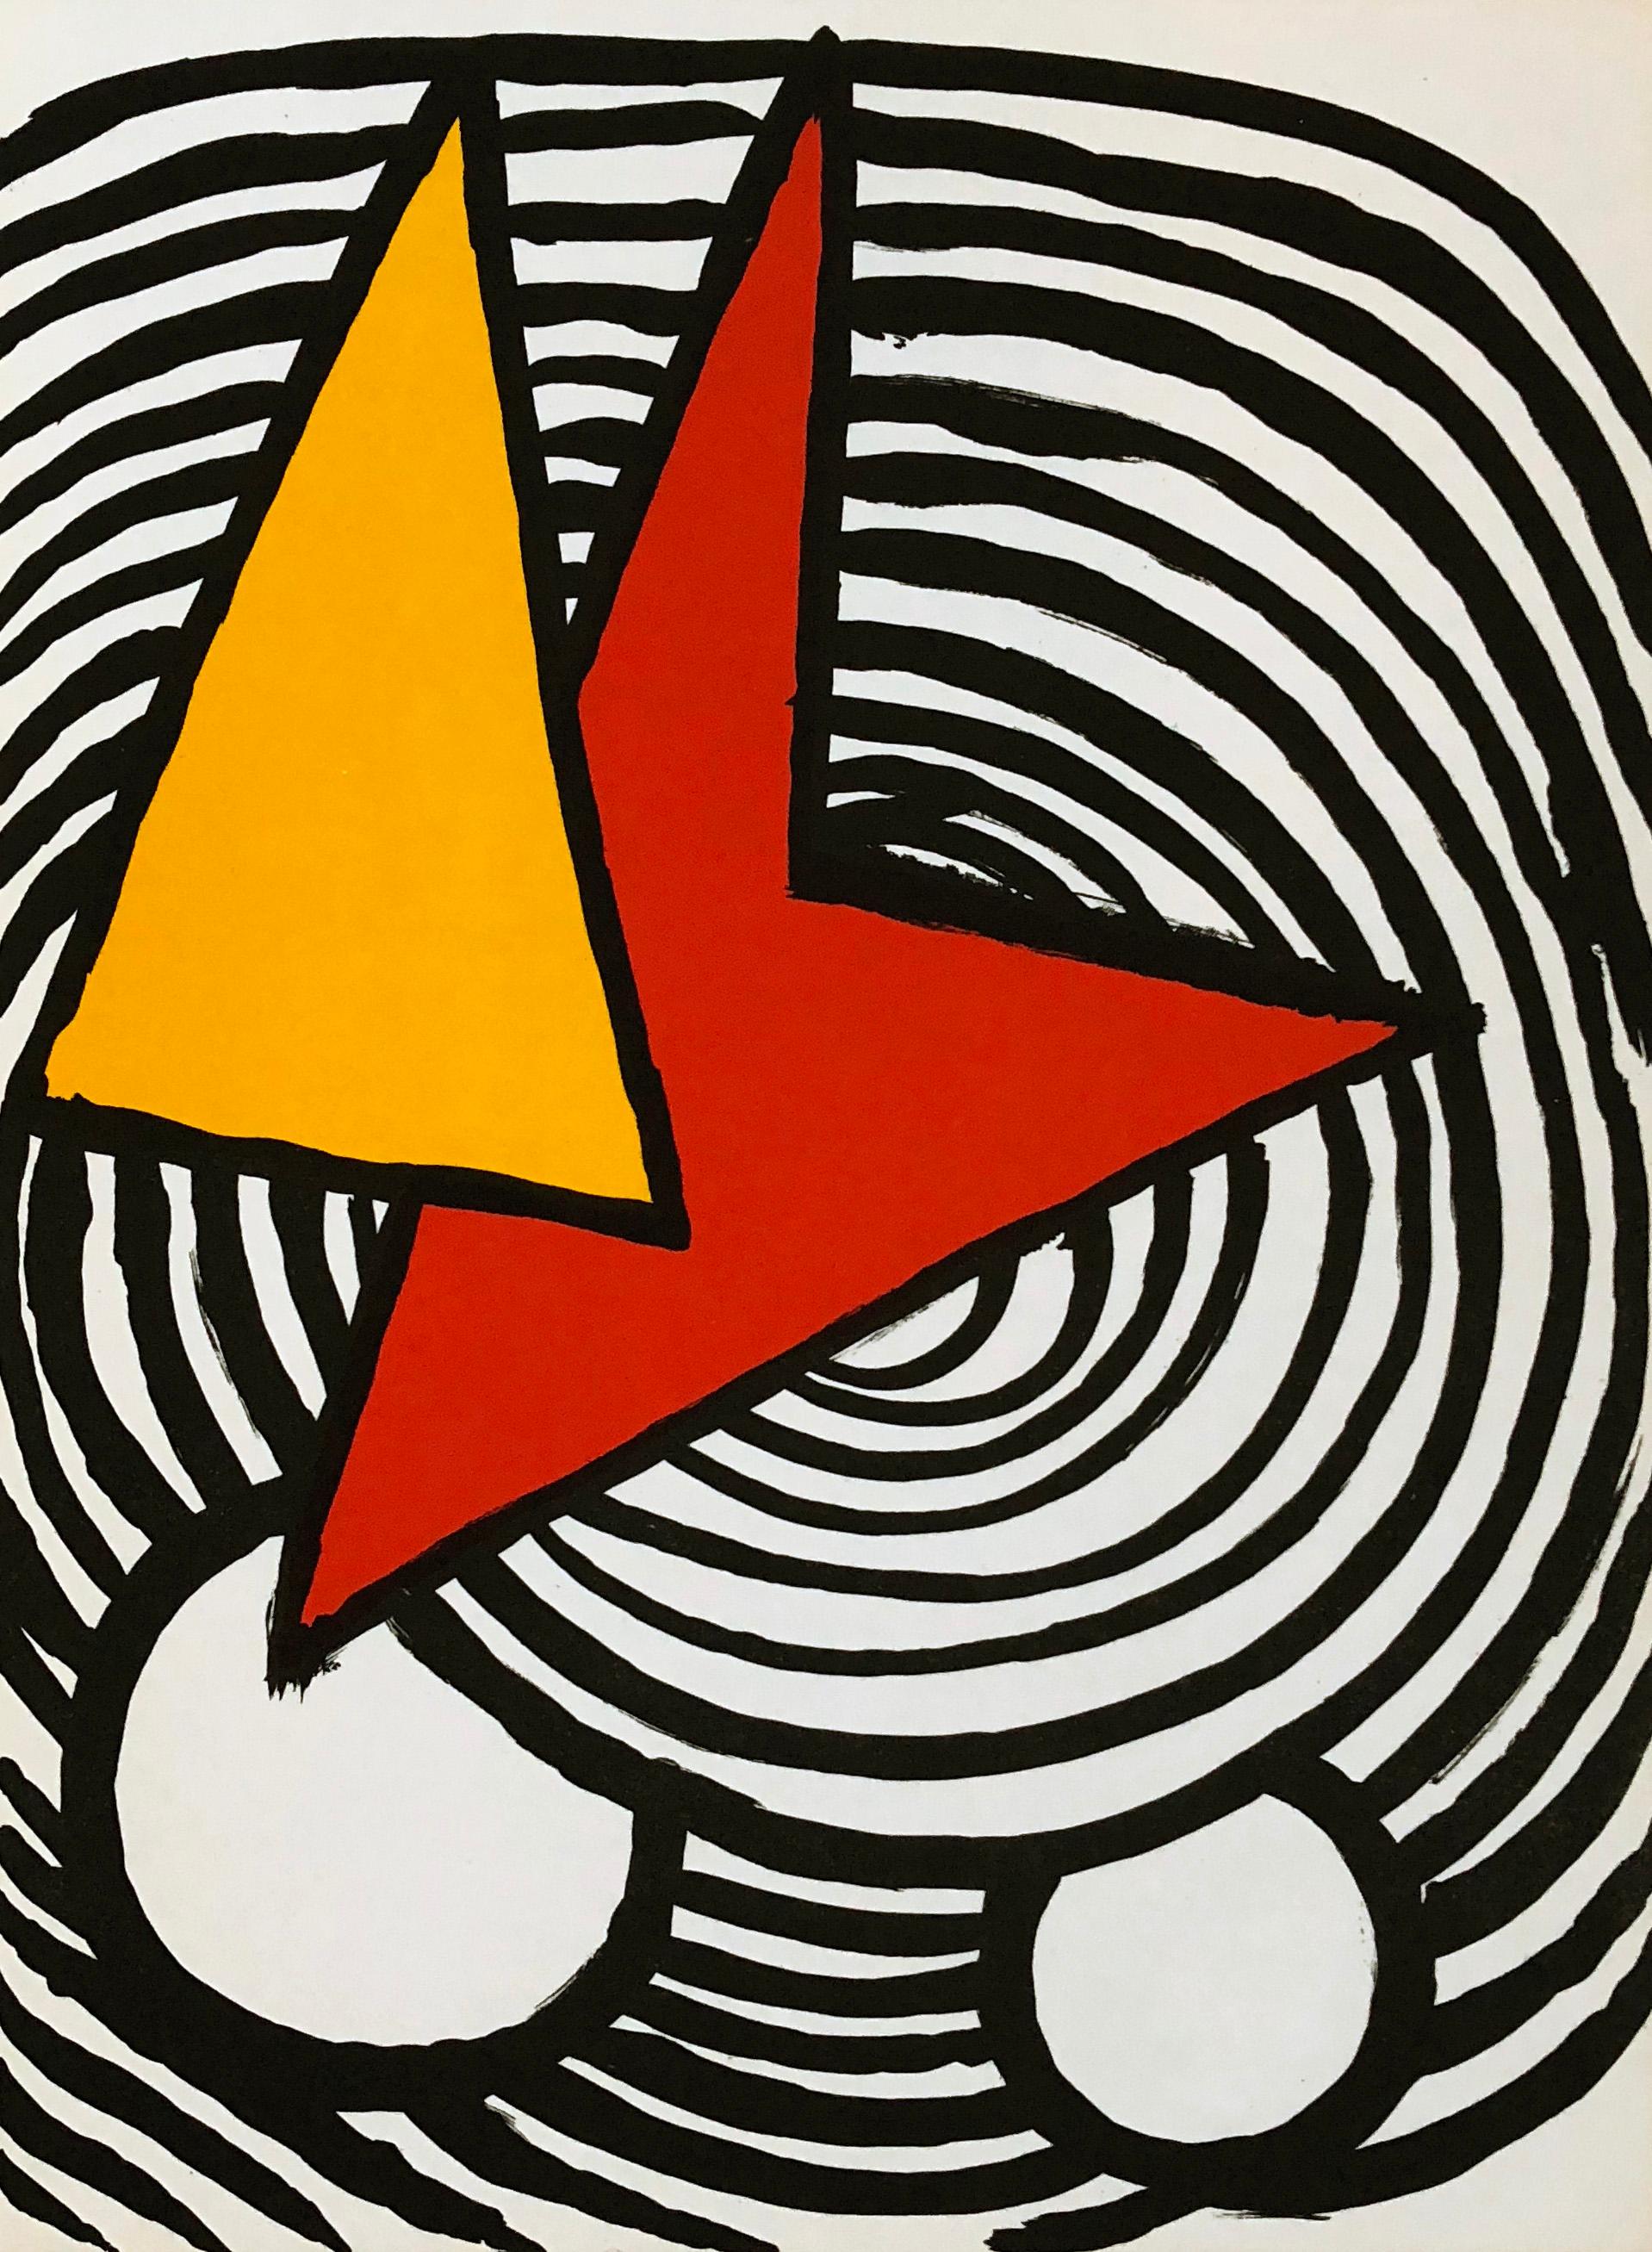 Vintage Original Alexander Calder Lithograph 
Portfolio: Derriere Le Miroir, 1973
Published by: Galerie Maeght, Paris, 1973 

Medium: Lithograph in colors; 1973
Dimensions: 11 x 15 inches
Minor fading; otherwise excellent condition
Unsigned 